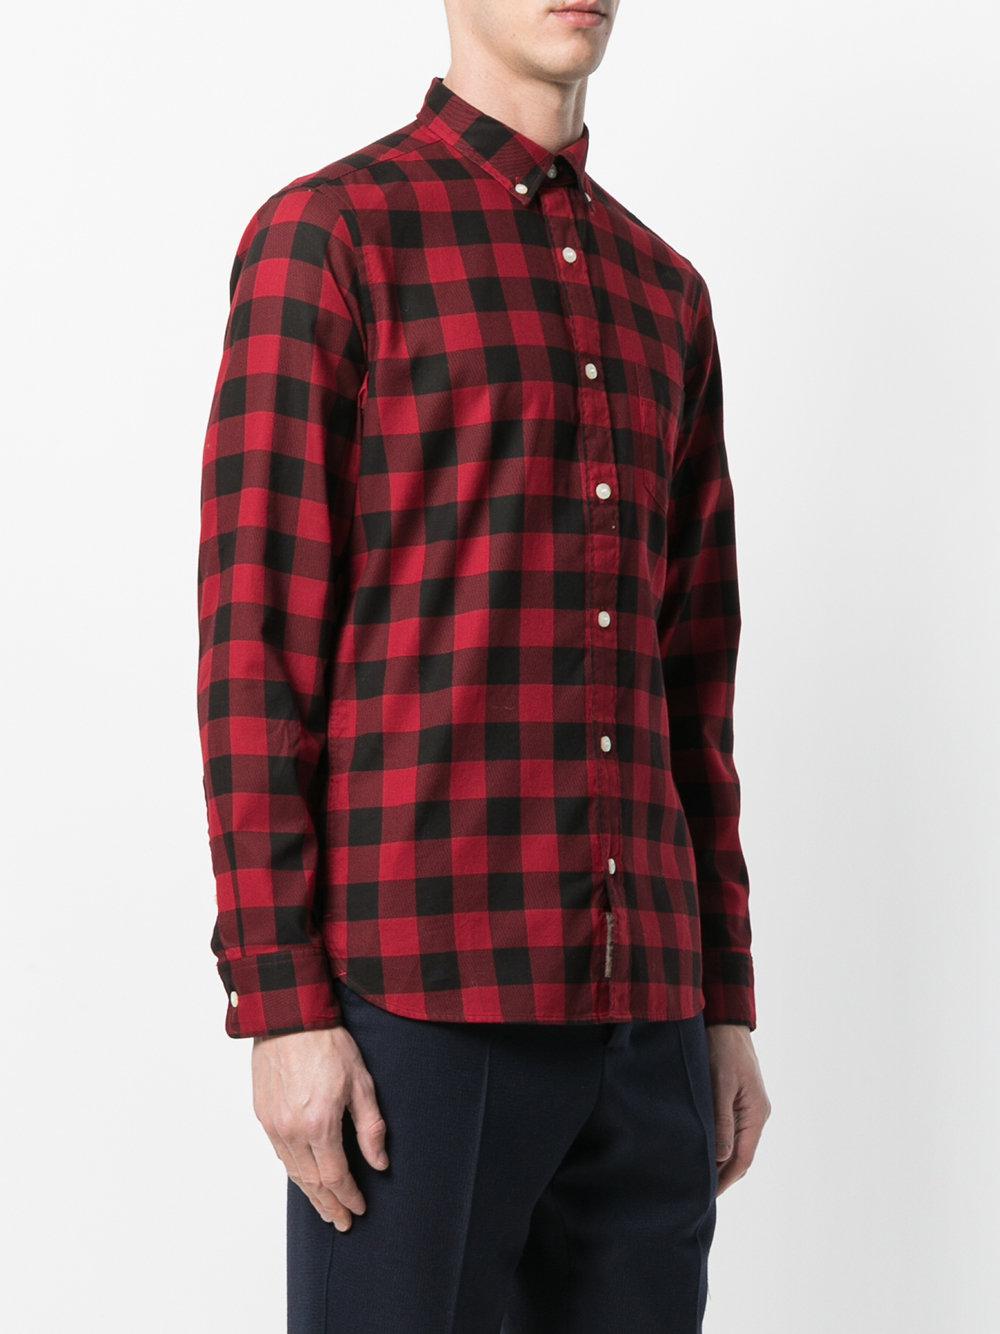 red and black burberry shirt Online 